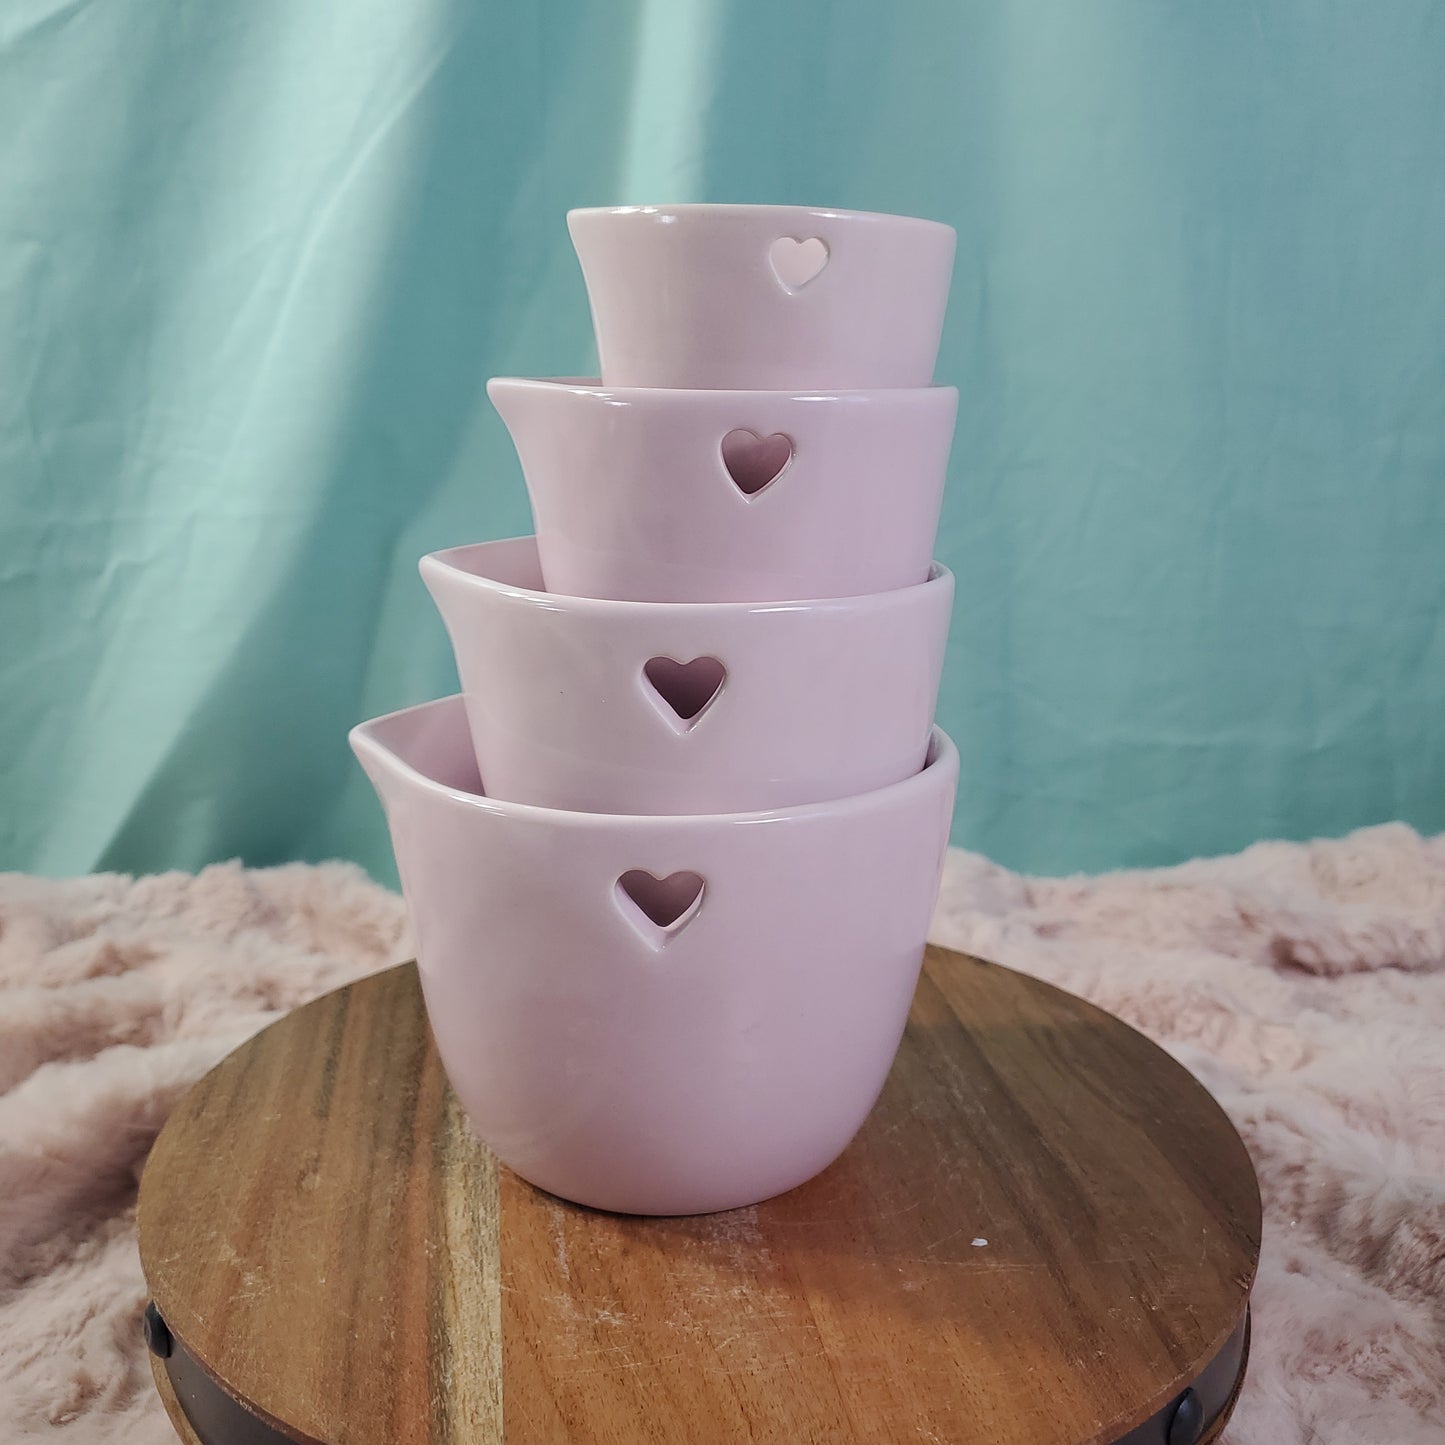 Rae Dunn Valentine's Day Pink Ceramic Measuring Cups - Set of 4